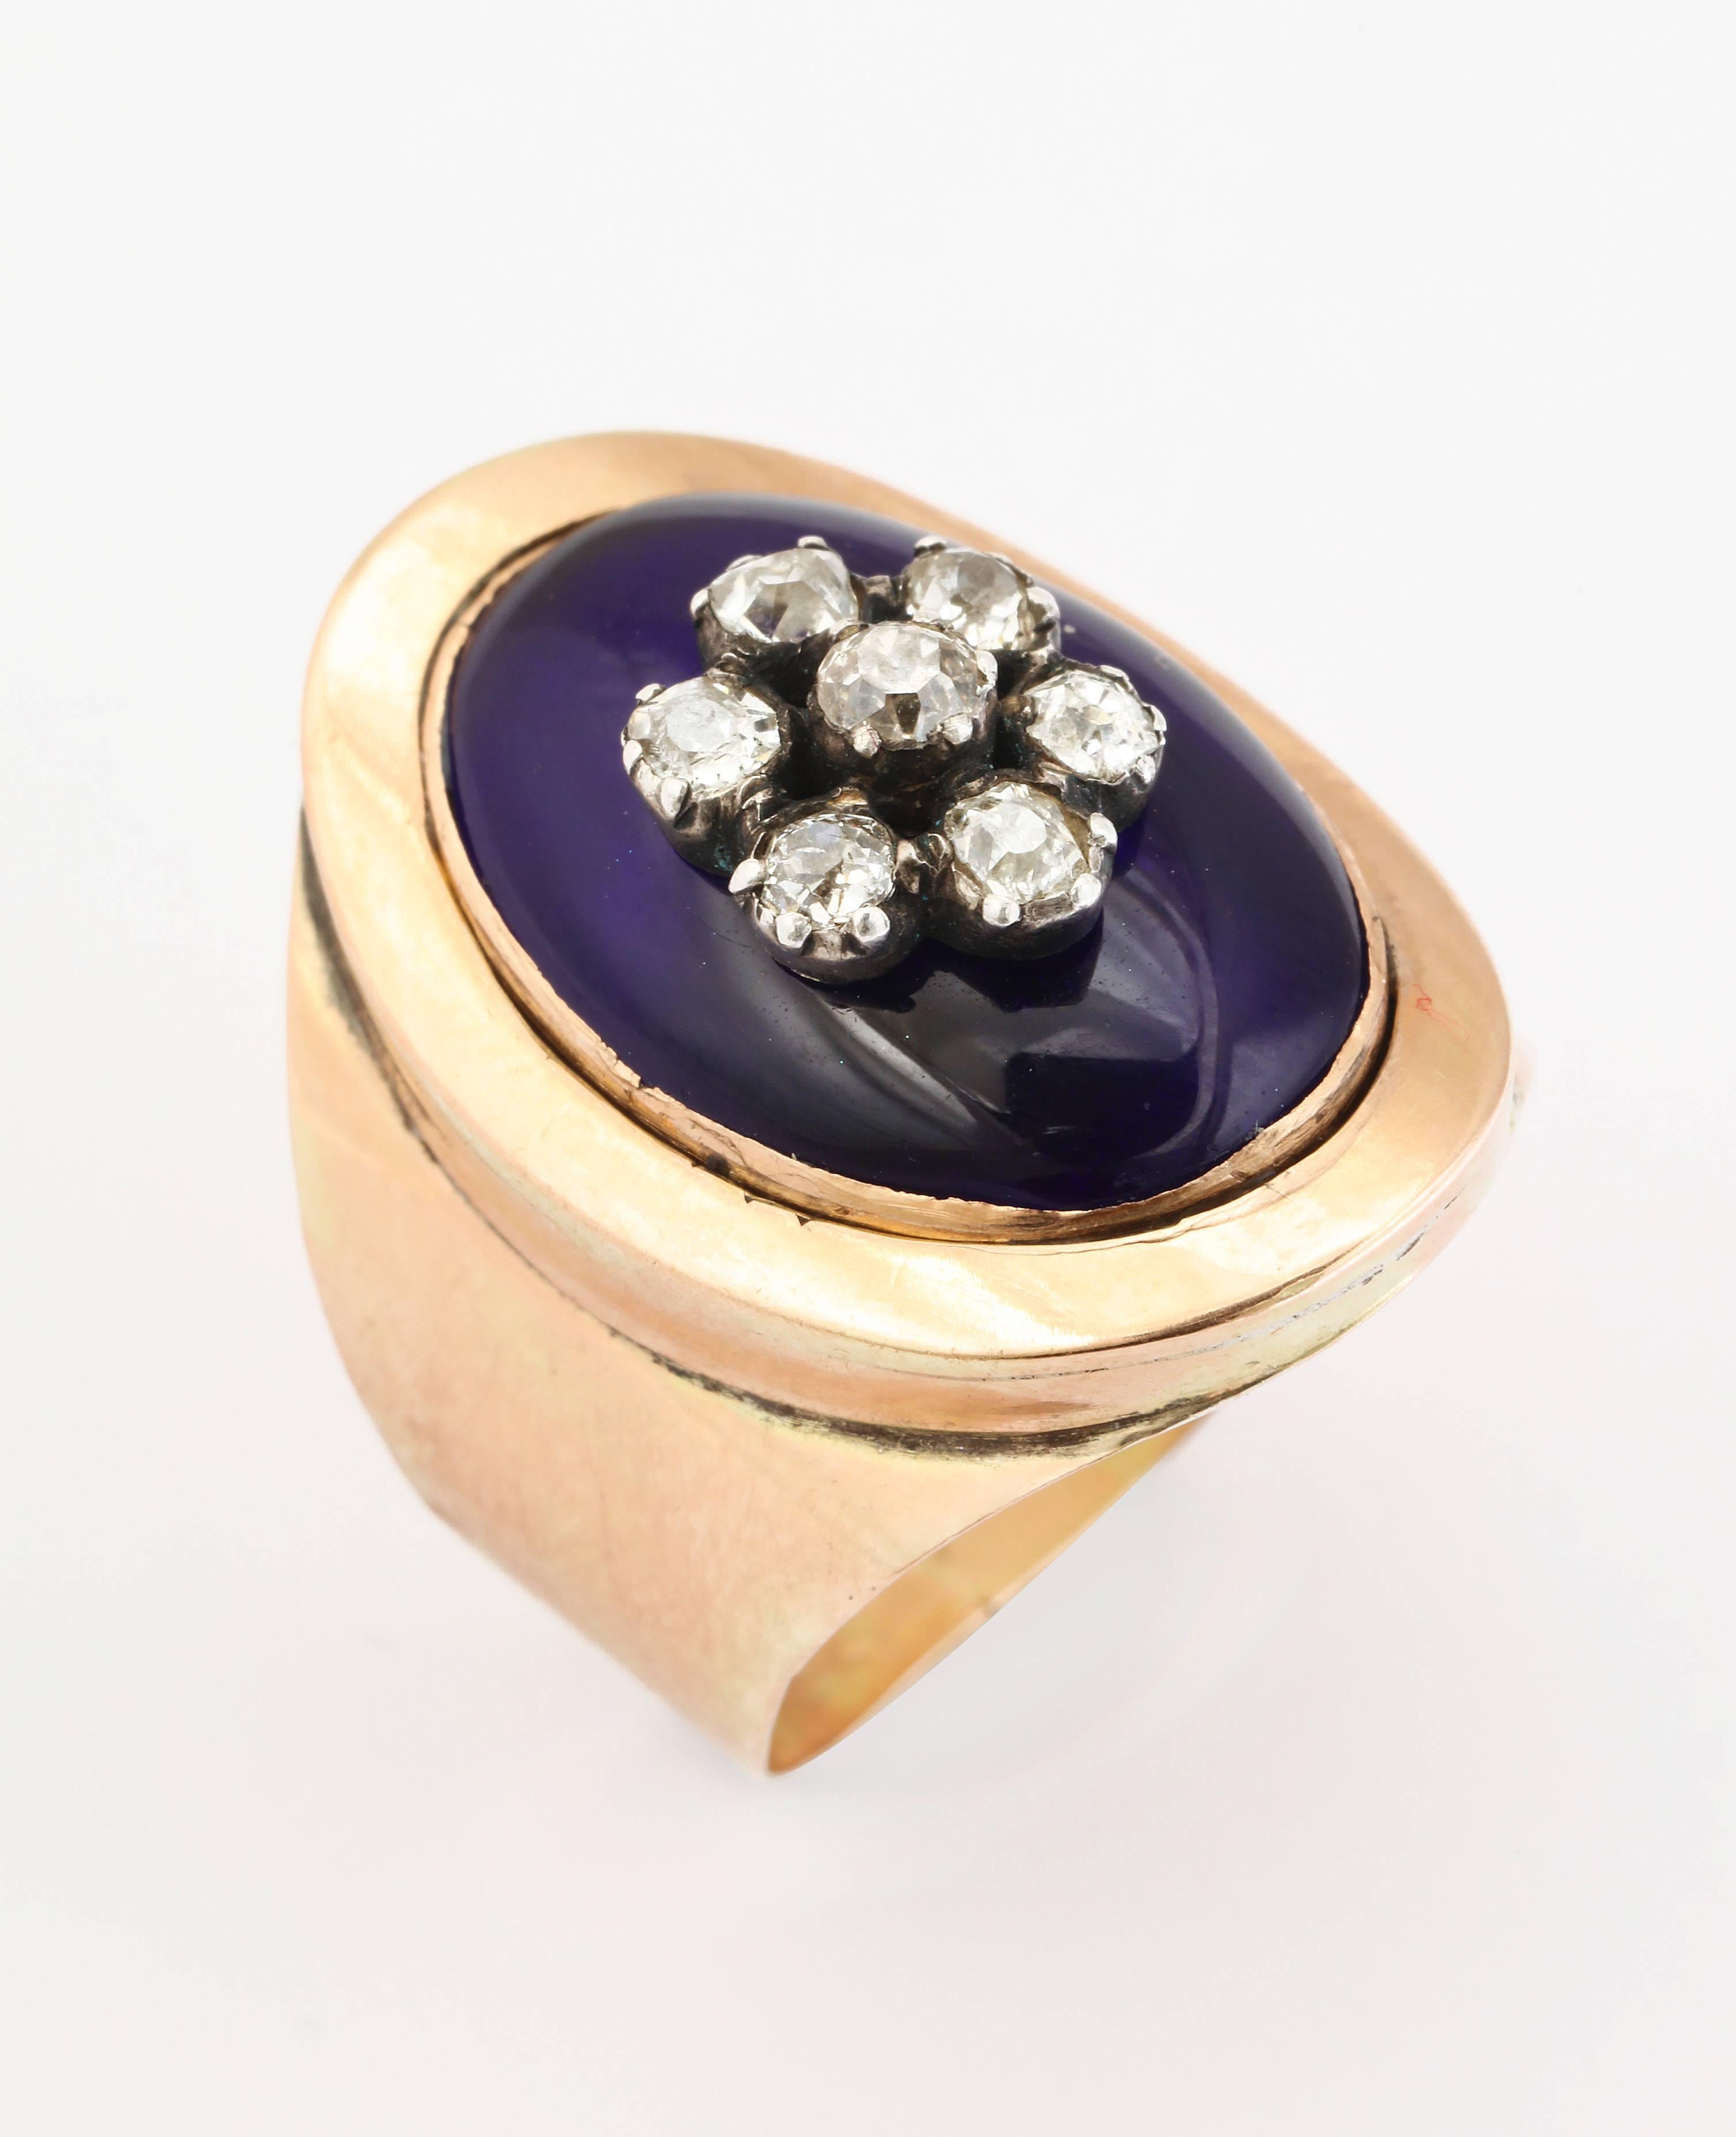 A stunning ring of 15 kt gold, lustrous medium blue enamel and a central diamond flower of antique diamonds makes an important appearance in its broad cigar band shank. This is high on my list of favorite style antique rings. It curves to the finger